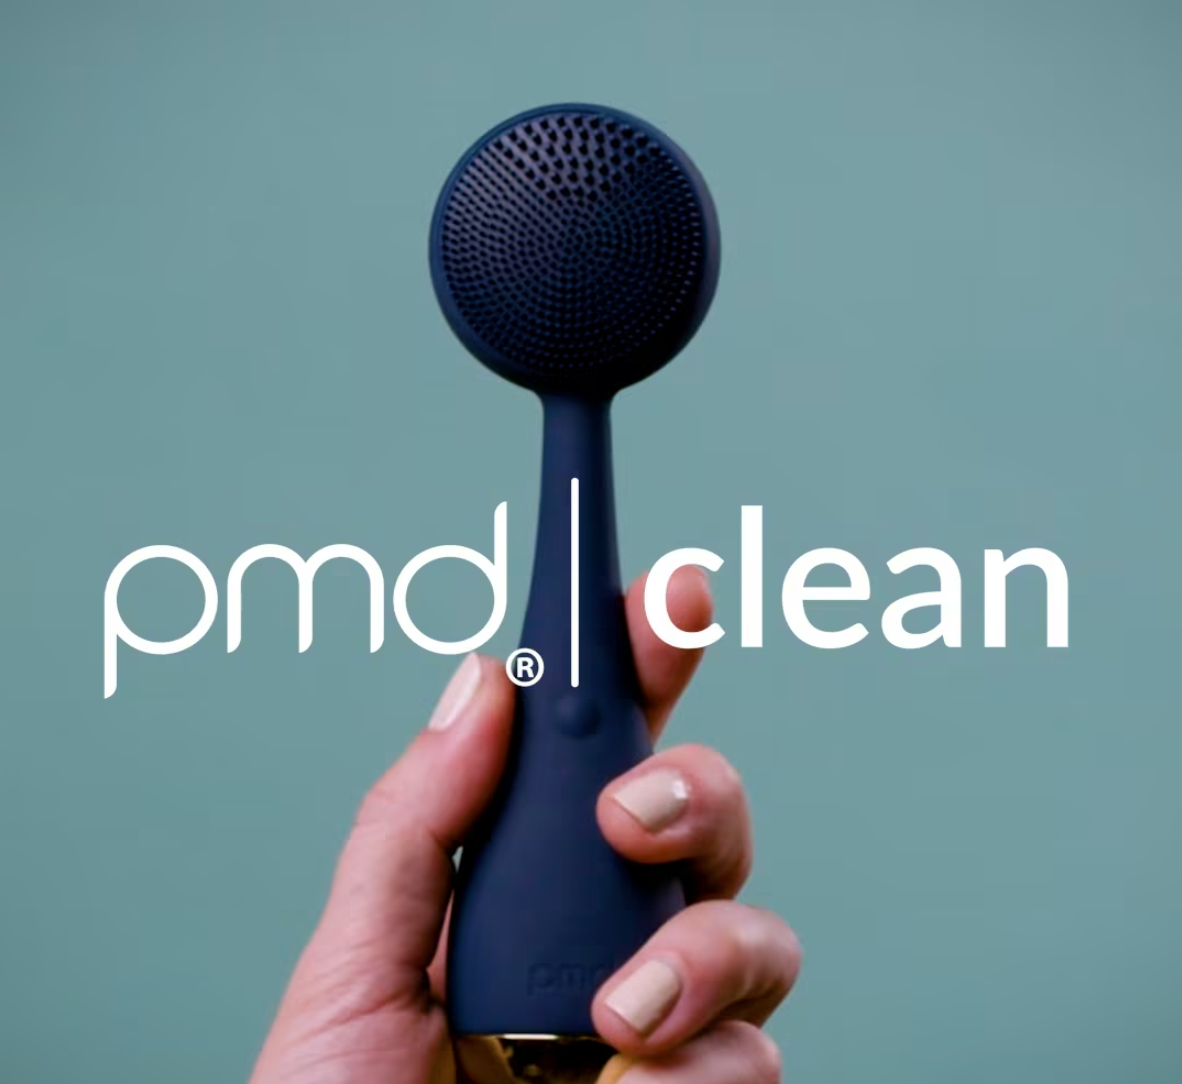 4001-Teal?Meet the PMD Clean